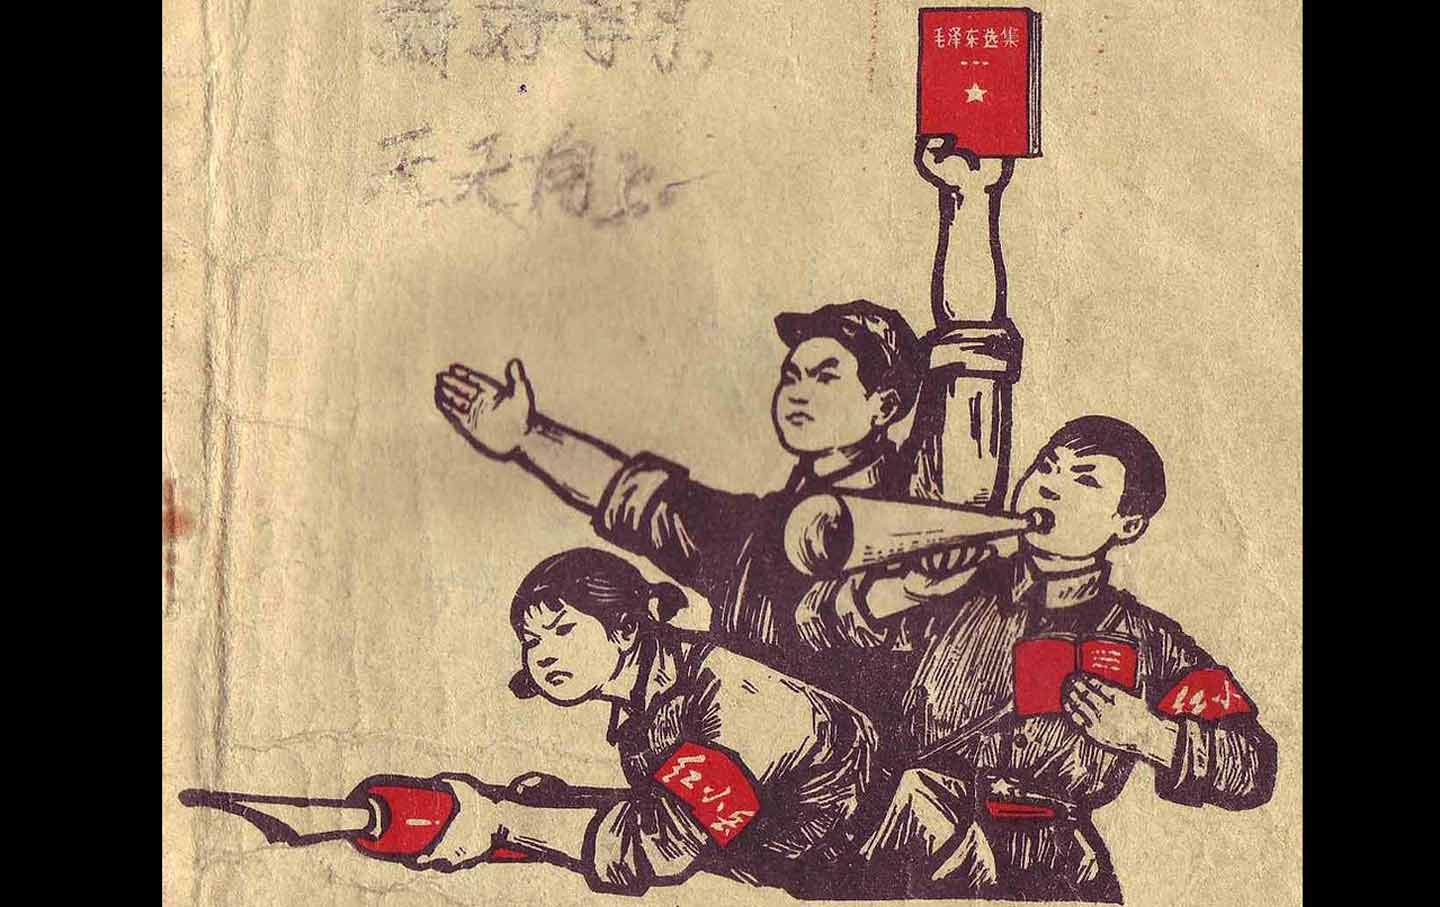 Red Guards (with “Quotations From Chairman Mao Tse-tung” in hand) on the cover of an elementary school textbook from Guangxi, 1971.